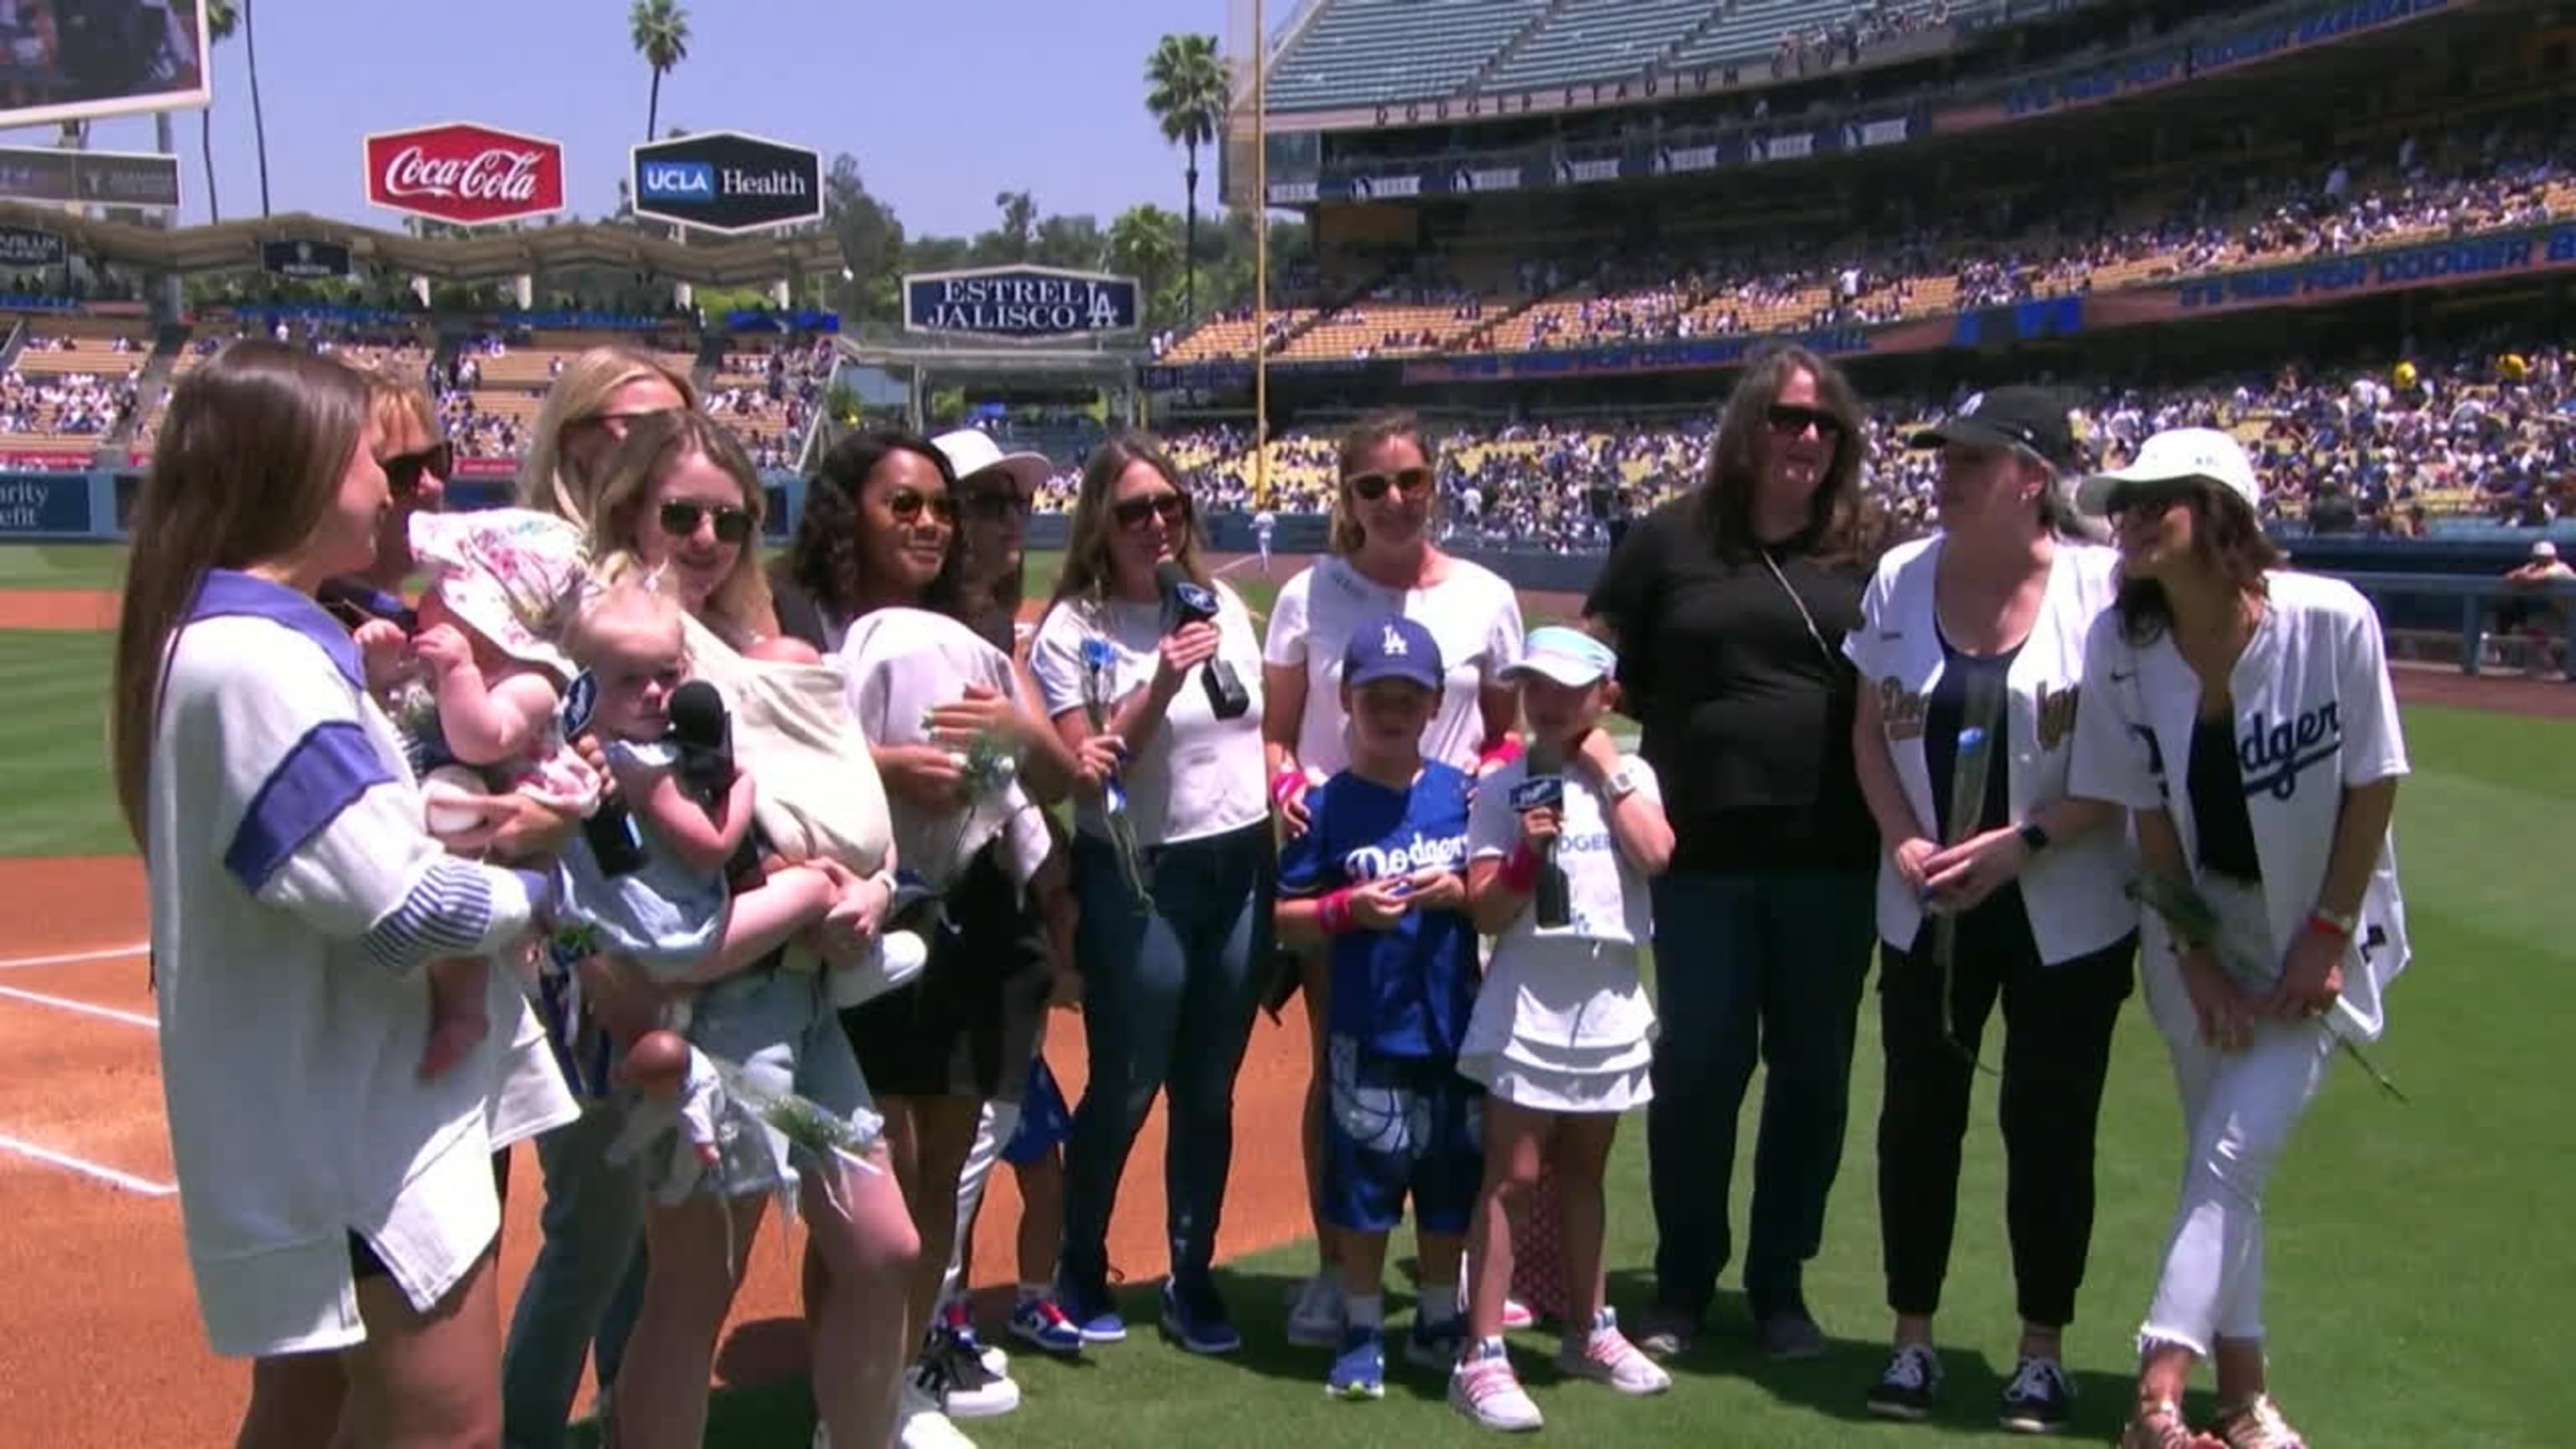 MLB good to highlight breast cancer, but Mother's Day is so much more